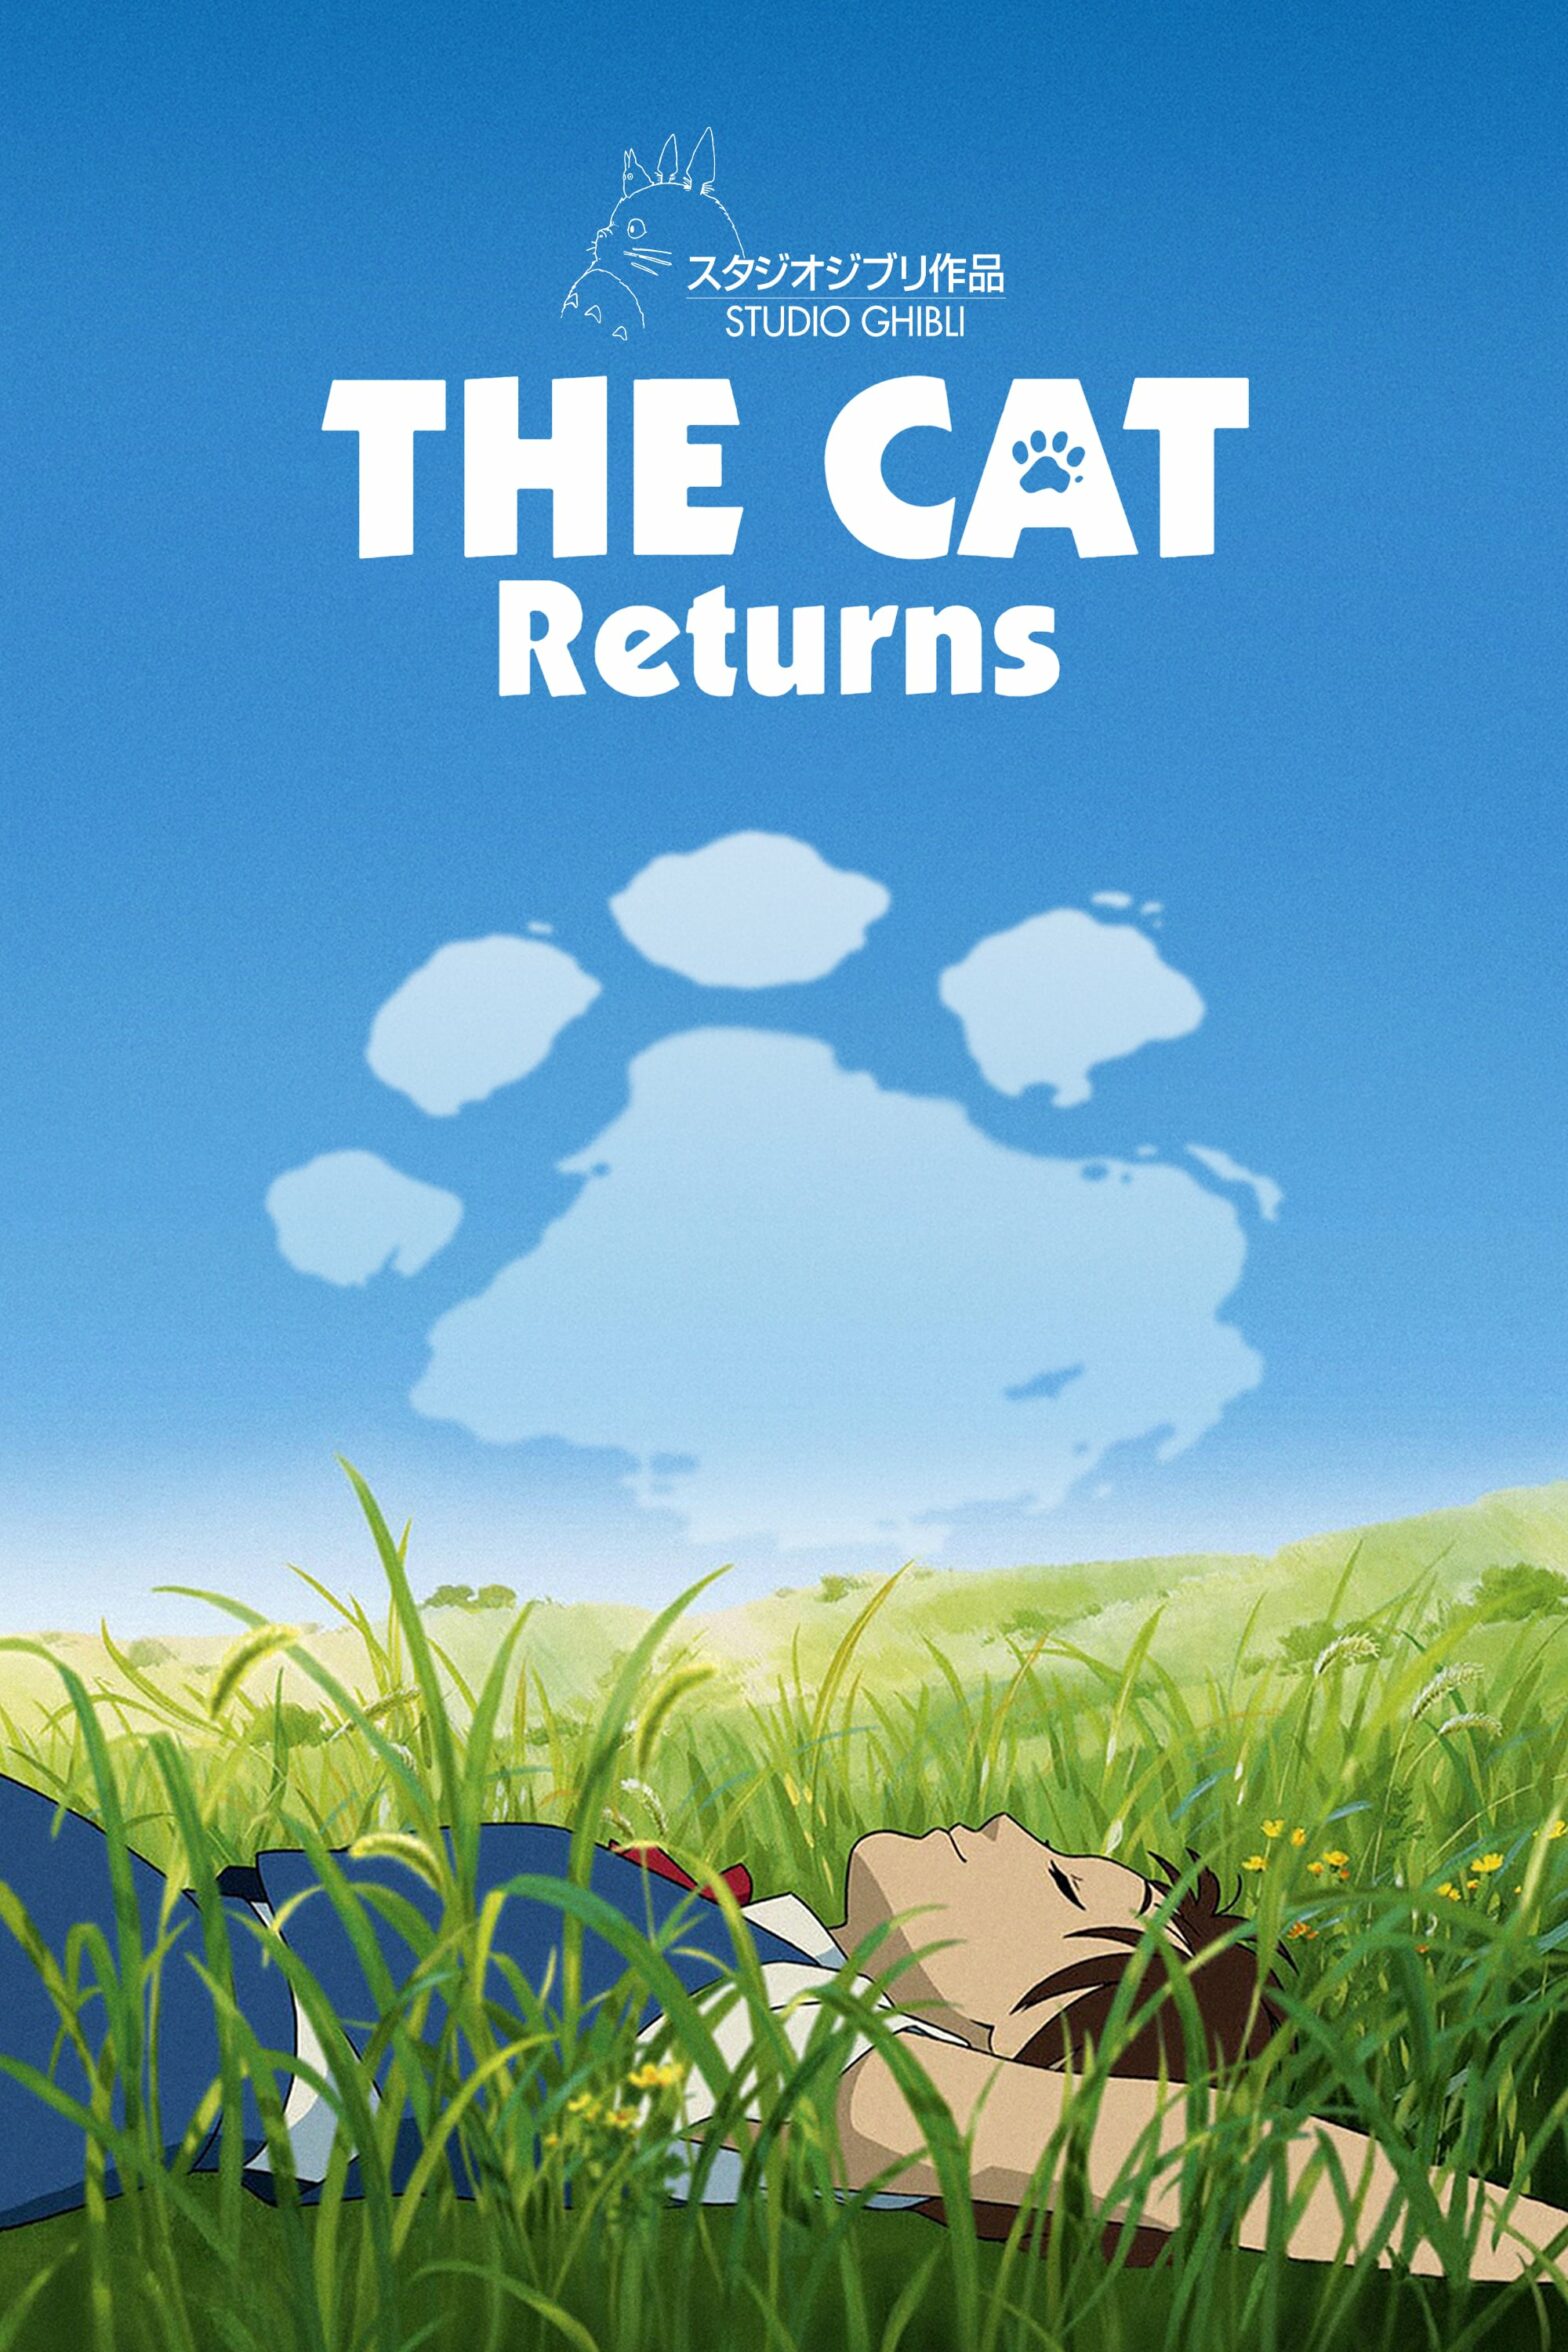 Poster for the movie "The Cat Returns"